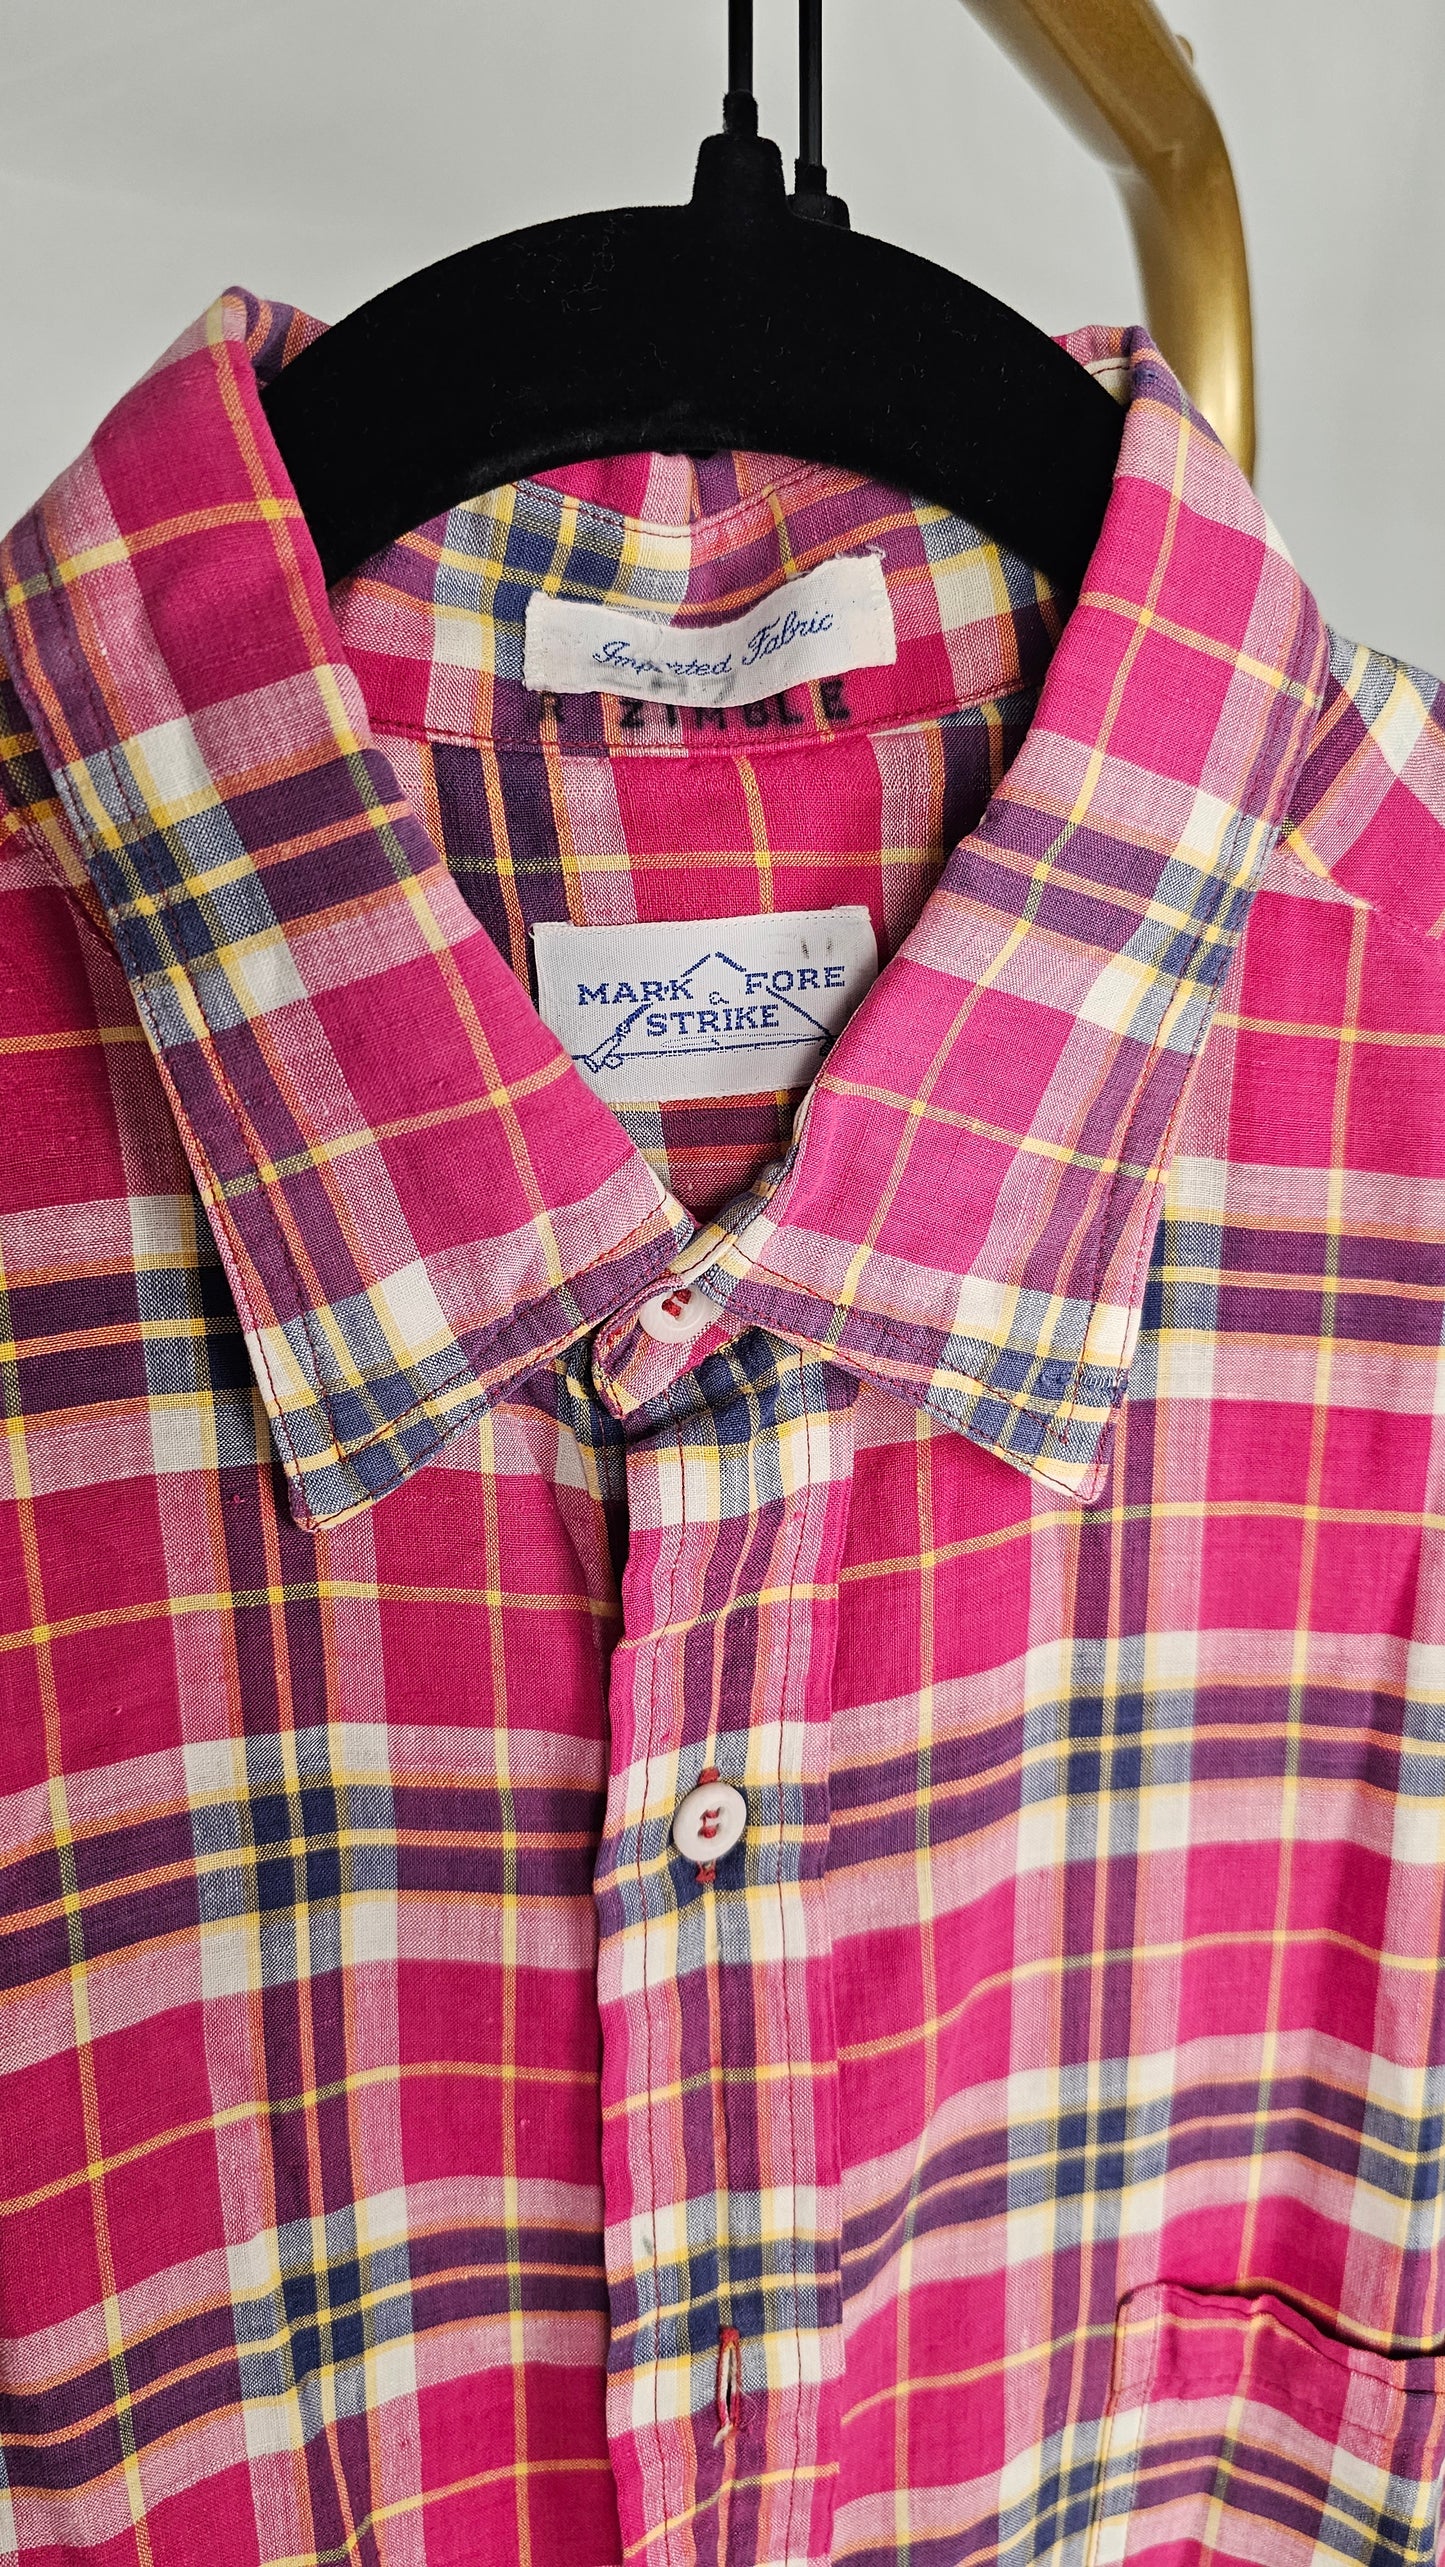 Vintage Mark Fore & Strike Madras Short-Sleeve Button Down